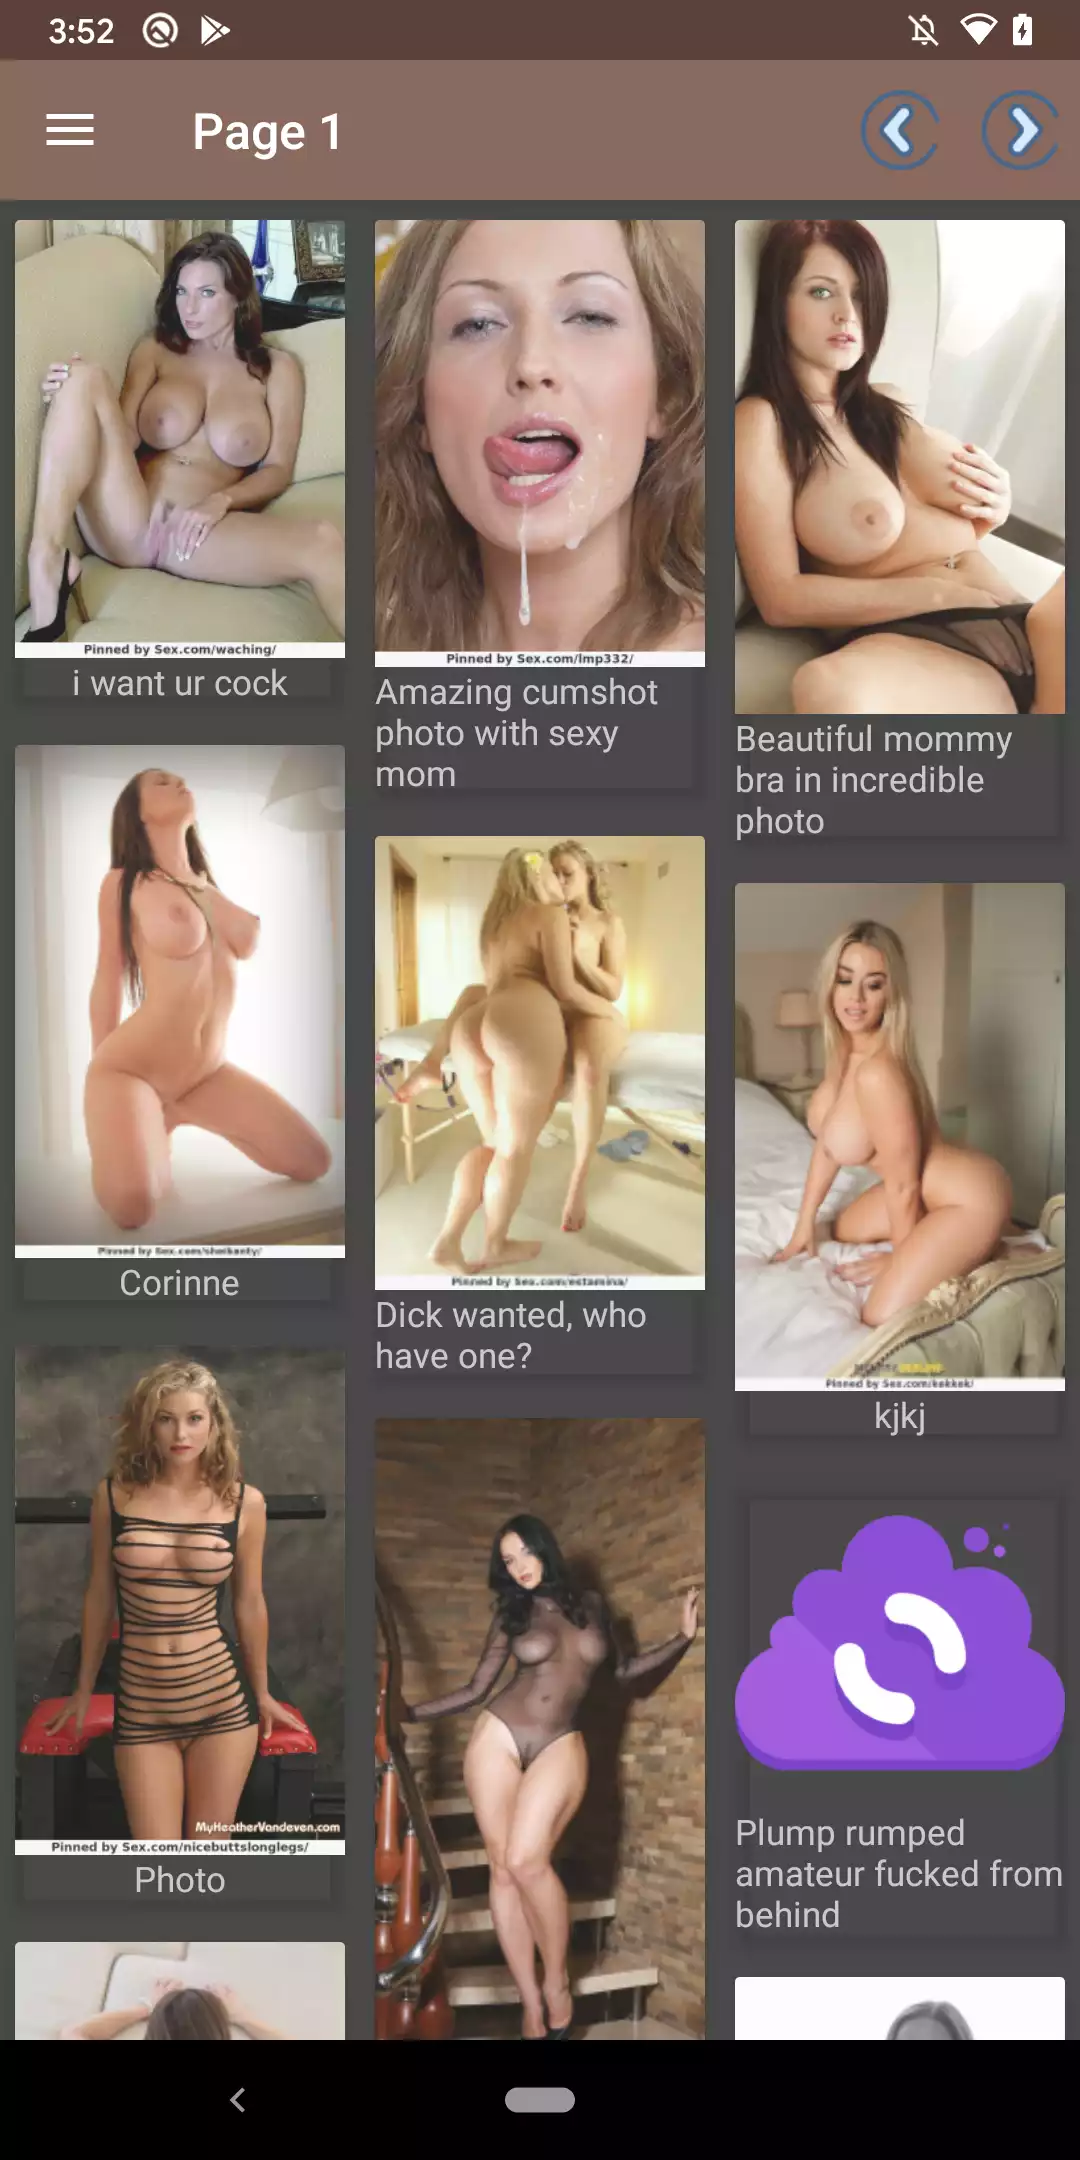 Hot Milf Pics hot,top,shrinking,hentie,porn,dreams,galleries,sexy,image,apps,gallery,collection,photos,milf,pic,henatai,app,pics,hentai,apk